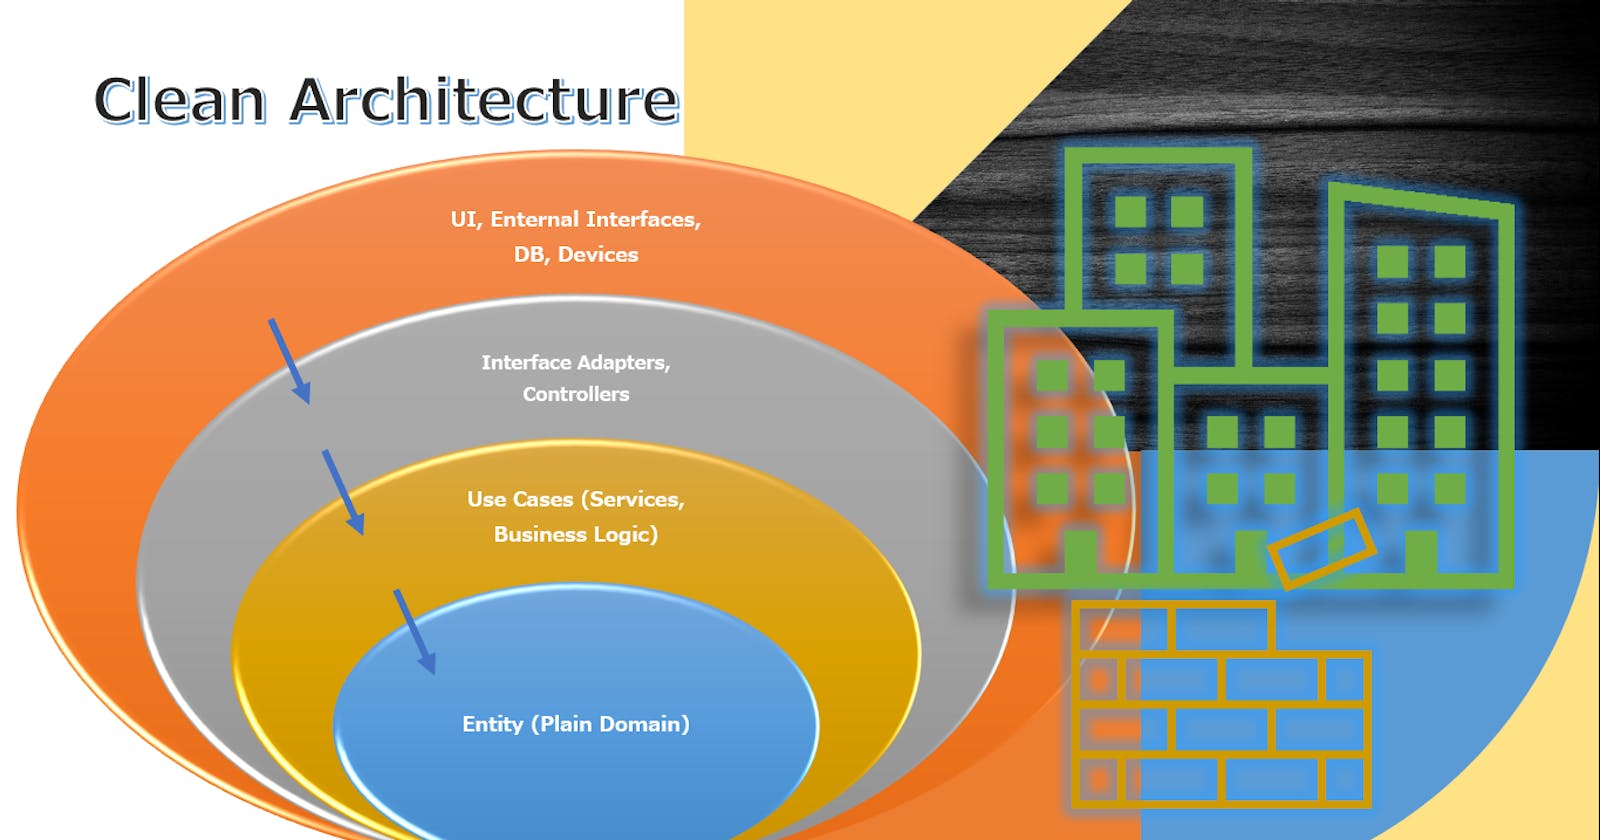 Clean Architecture - A Quick Introduction